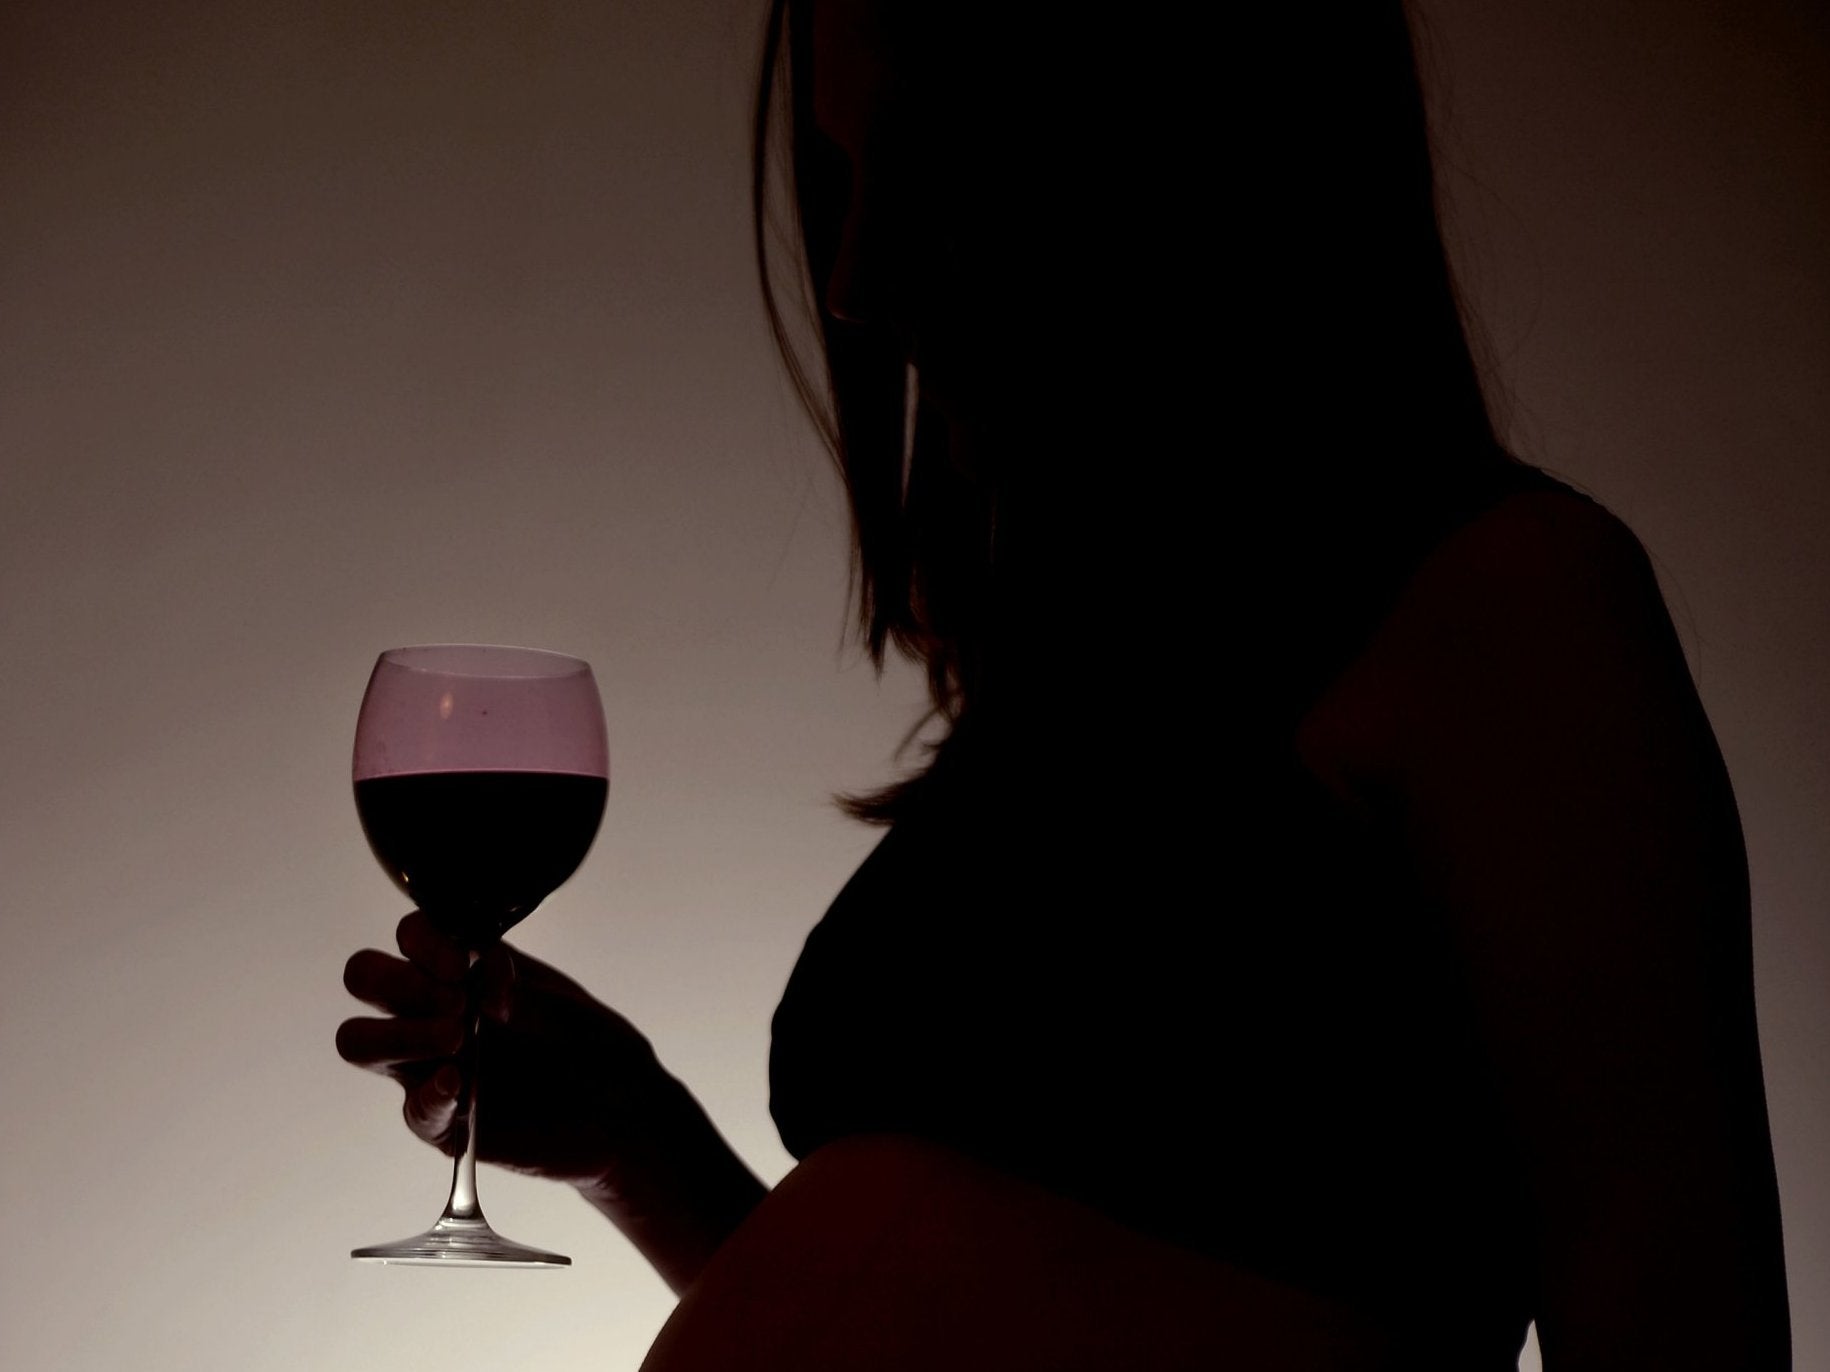 There is only one specialist clinic in England dealing with foetal alcohol spectrum disorder.